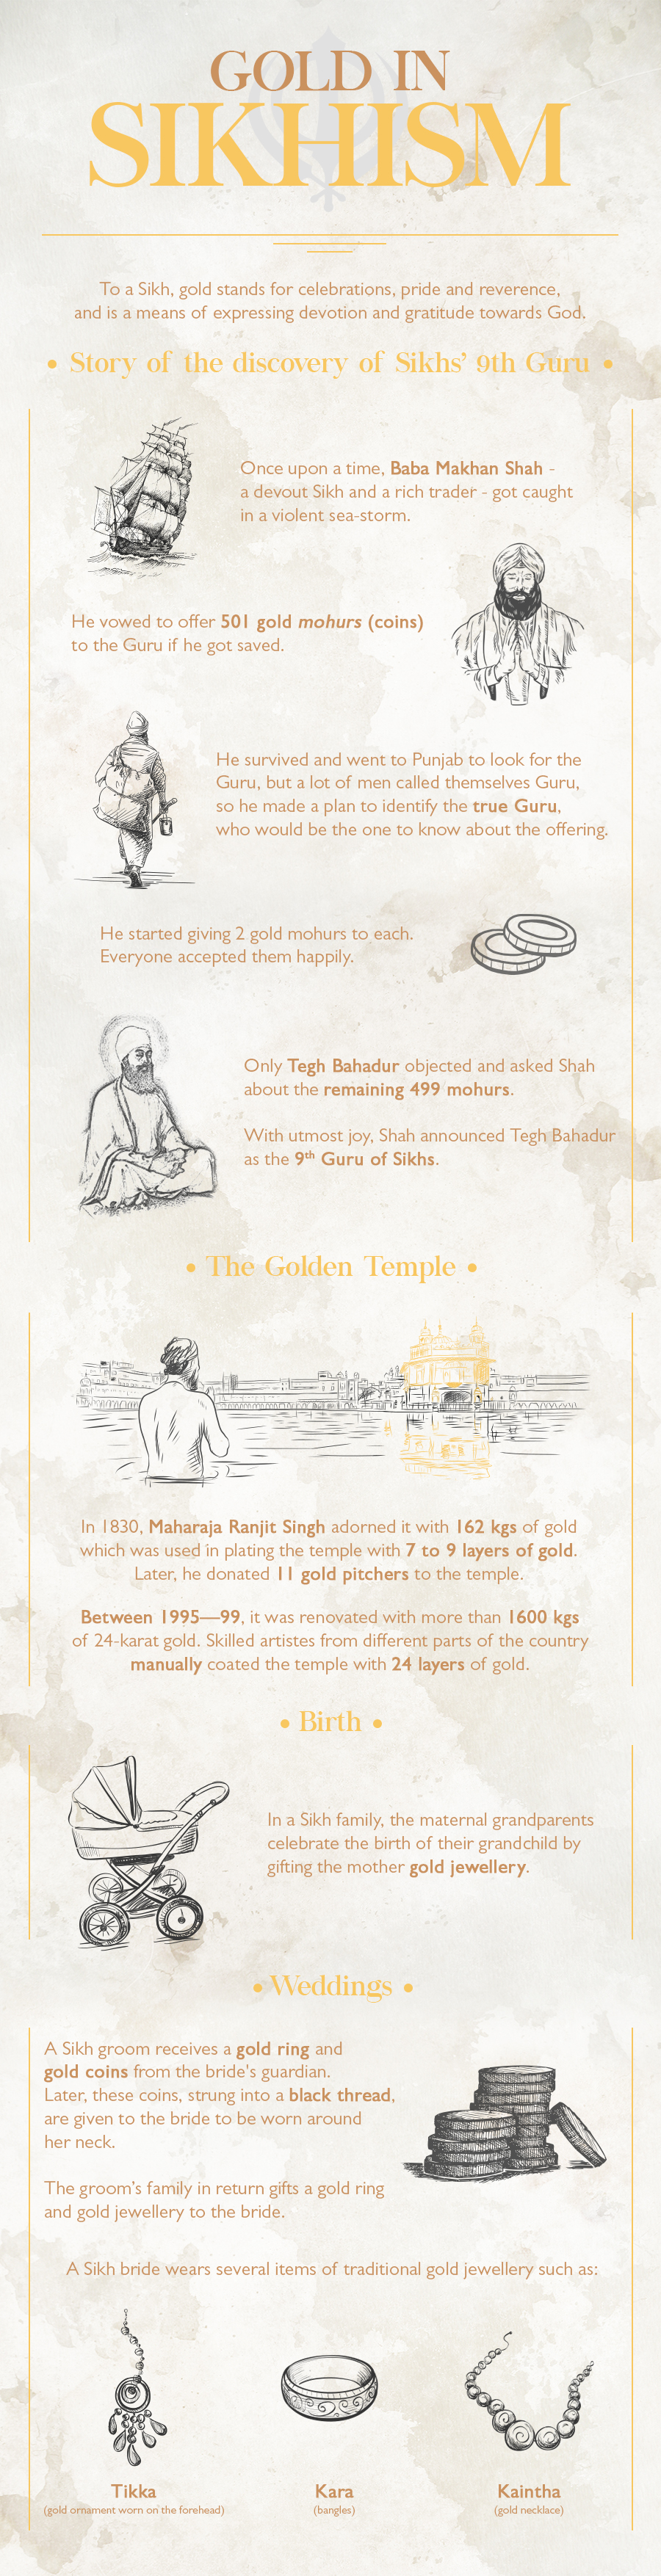 Gold stands for celebration, pride and reverence in Sikhism. Know how gold became an important part of life for sikhs and how it affects various facets of life in Sikhism.